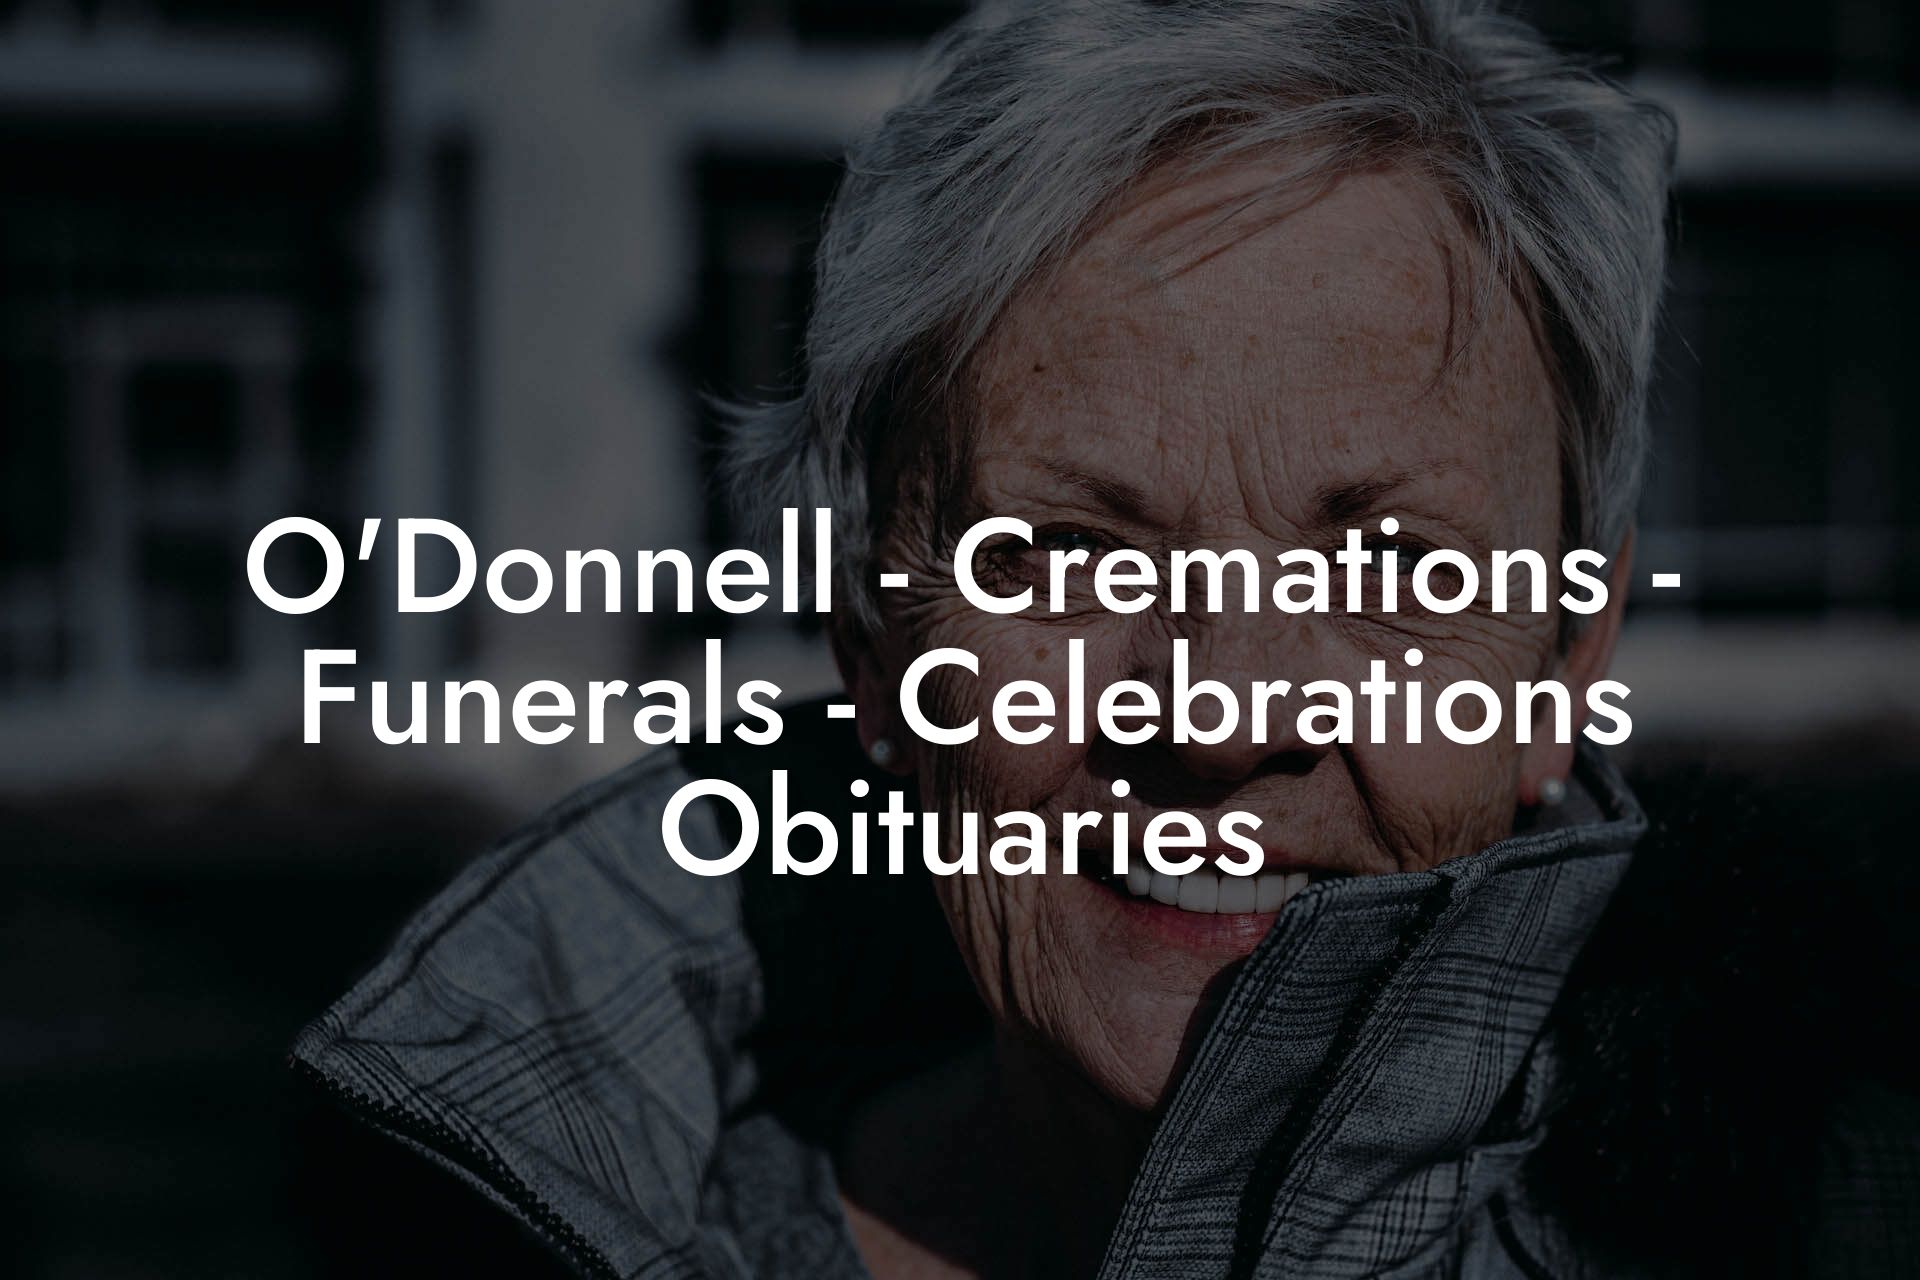 O'Donnell - Cremations - Funerals - Celebrations Obituaries